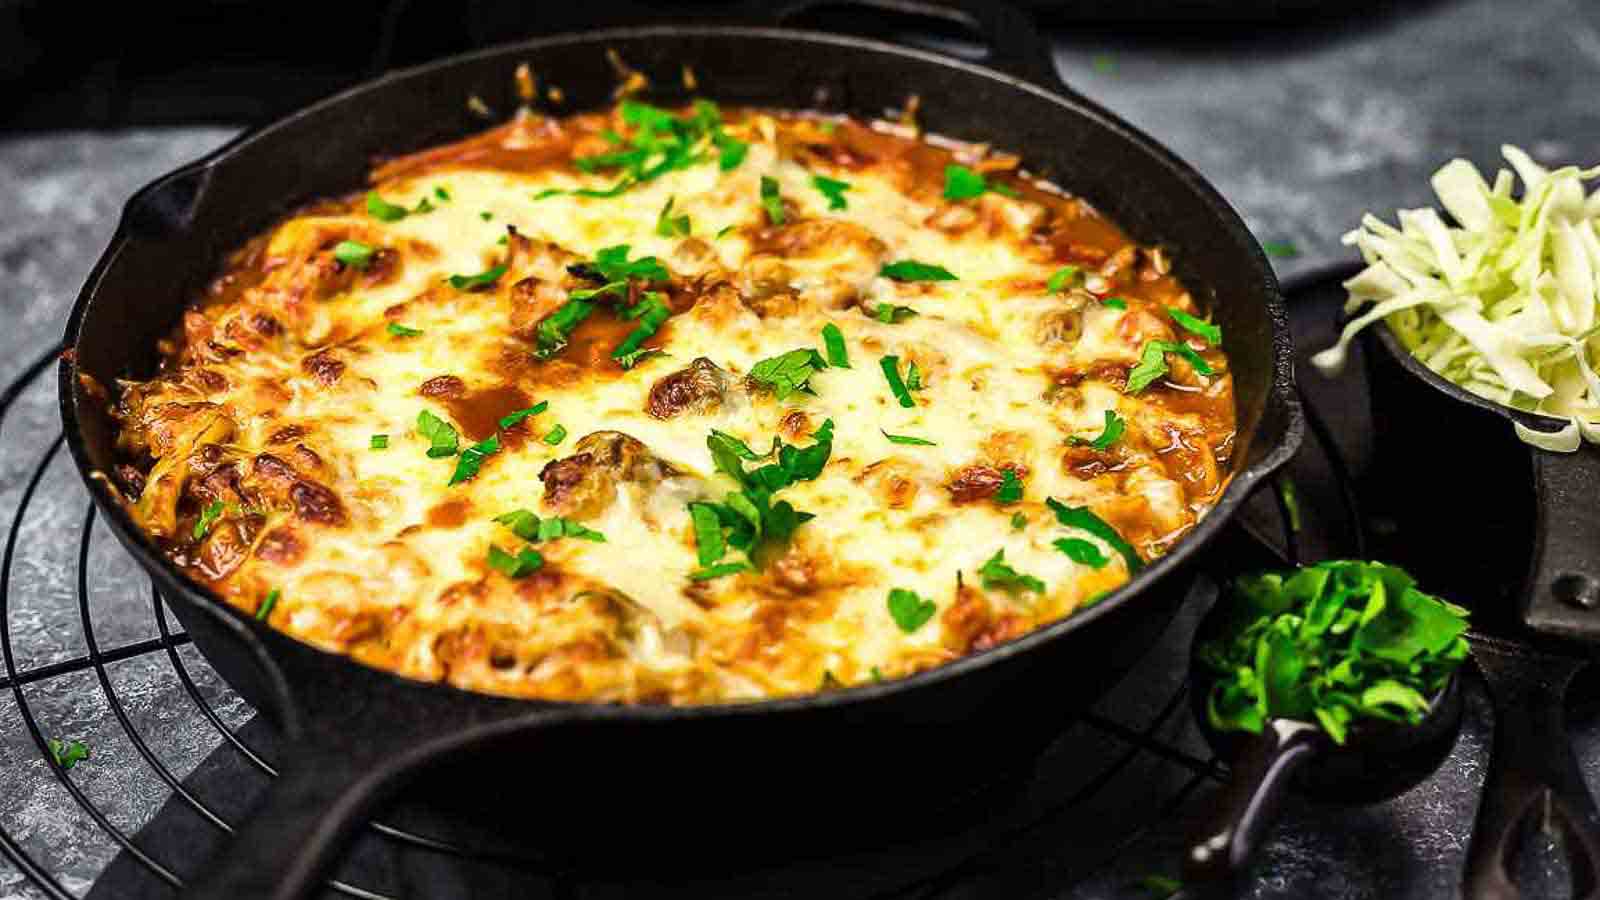 Cheesy Cabbage Beef Casserole. Photo credit: Low Carb – No Carb.